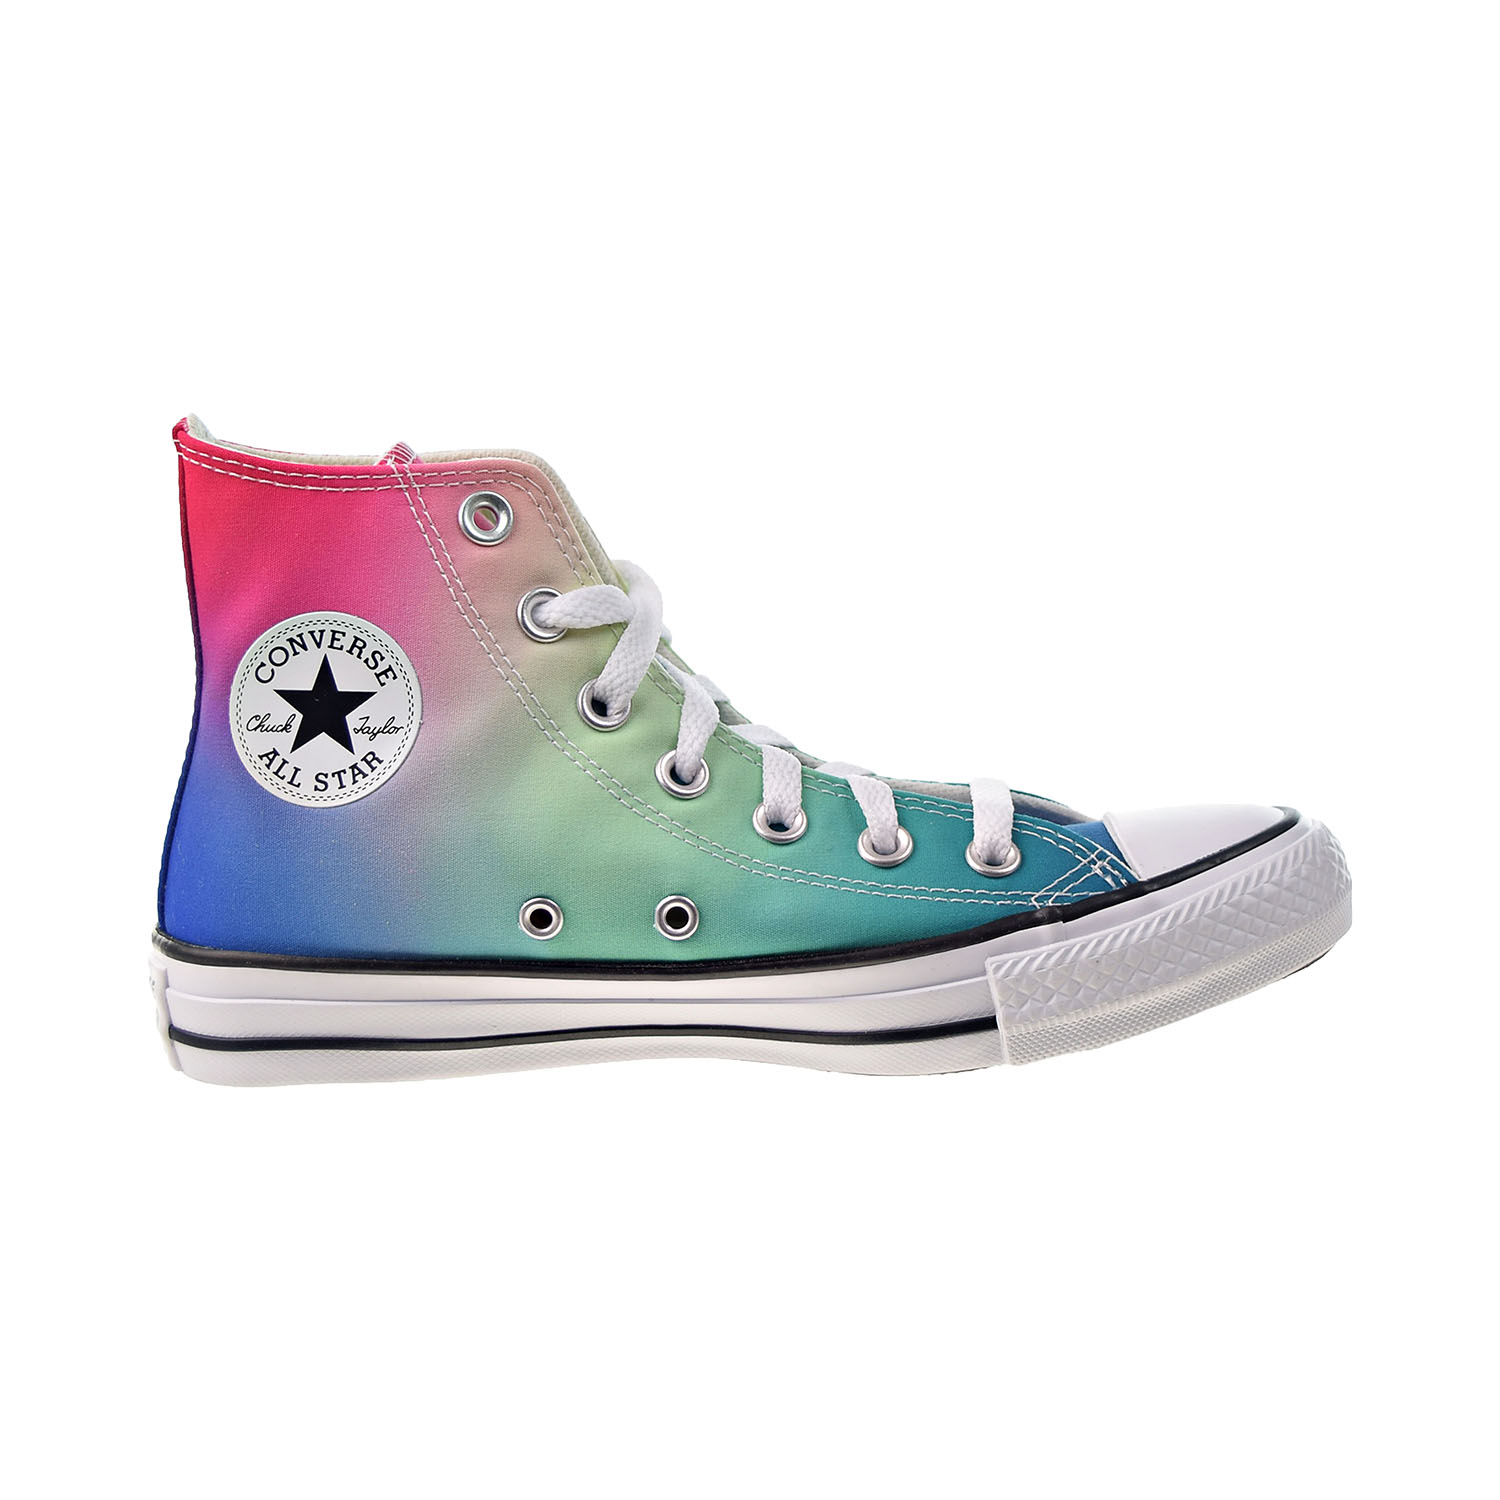 Converse Chuck Taylor All Star Hi "Psychadelic Hoops" Men's Shoes White 167592c - image 1 of 6